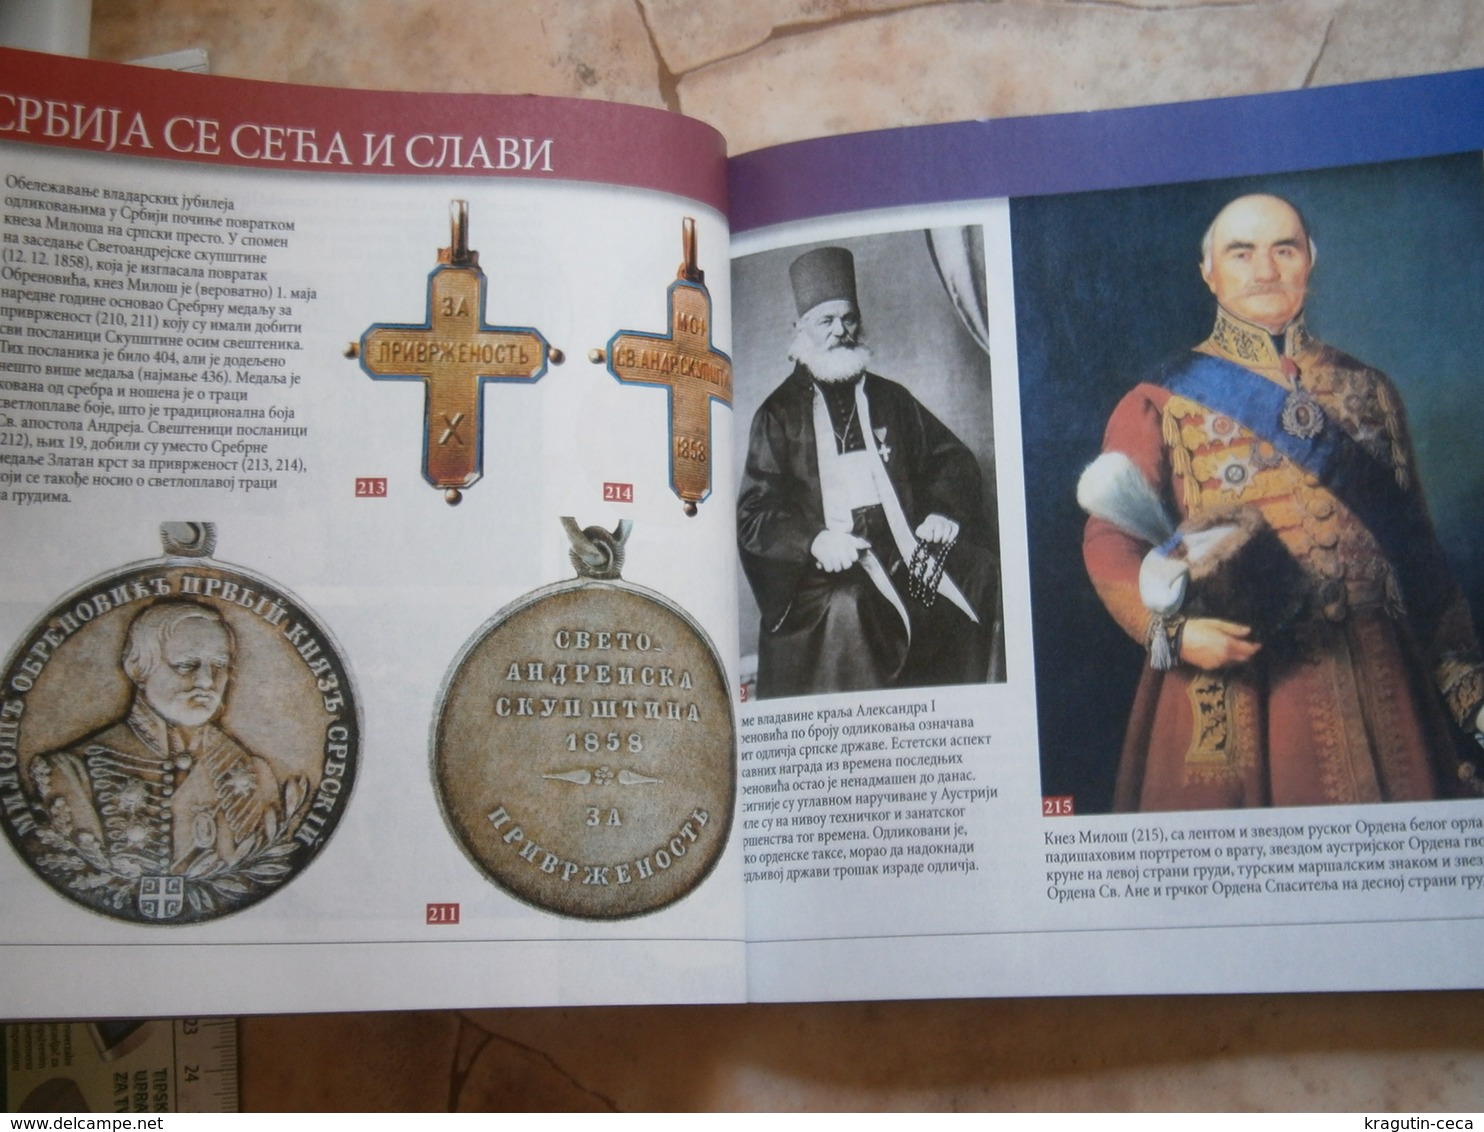 SERBIA ARMY MILITARY ROYAL DECORATIONS MEDAL ORDER BOOK DEKORATIONEN MEDAILLE BUCH RED CROSS Obilic Sv Sava White Eagle